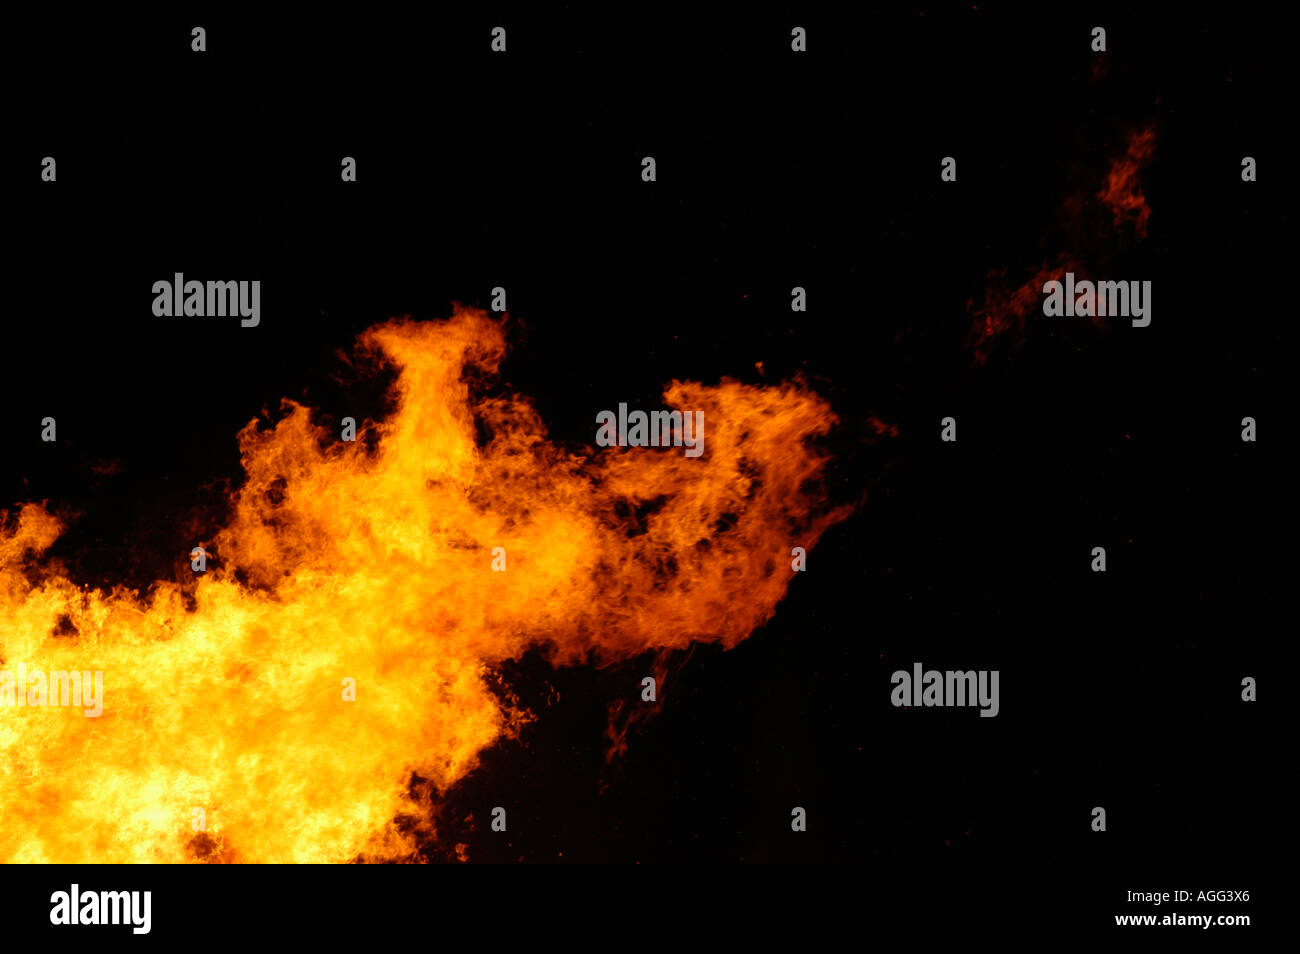 flame of blazing fire Stock Photo